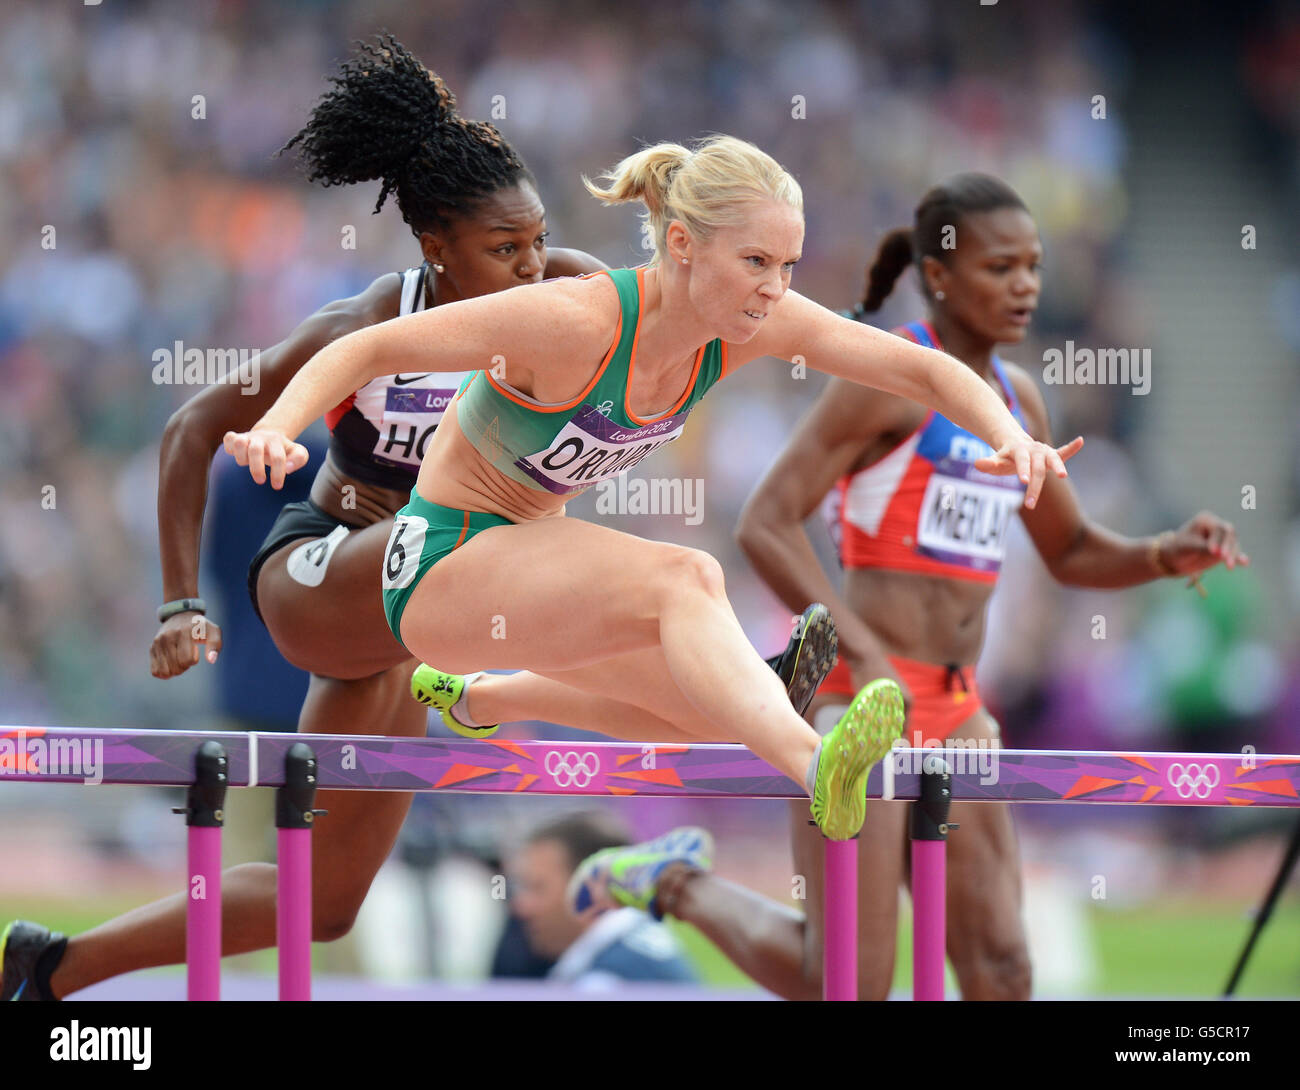 Ireland's Derval O'Rourke in action during the Women's 100m Hurdles heats at the Olympic Stadium, London. Stock Photo